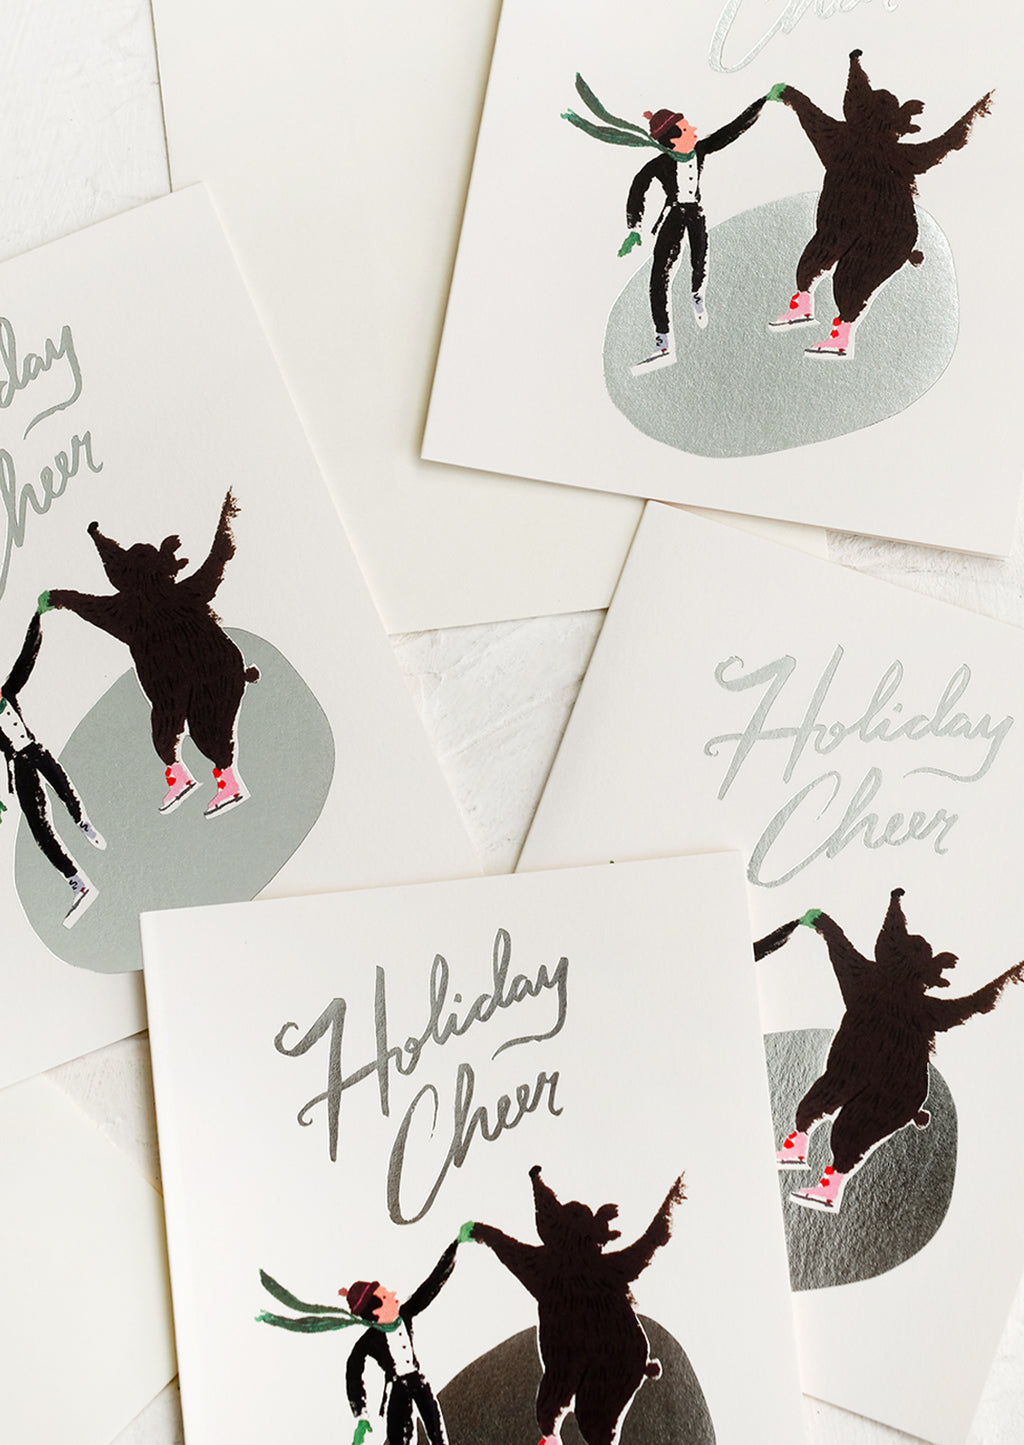 1: A set of cards depicting an ice skater and bear skating on silver pond, text reads "Holiday cheer".